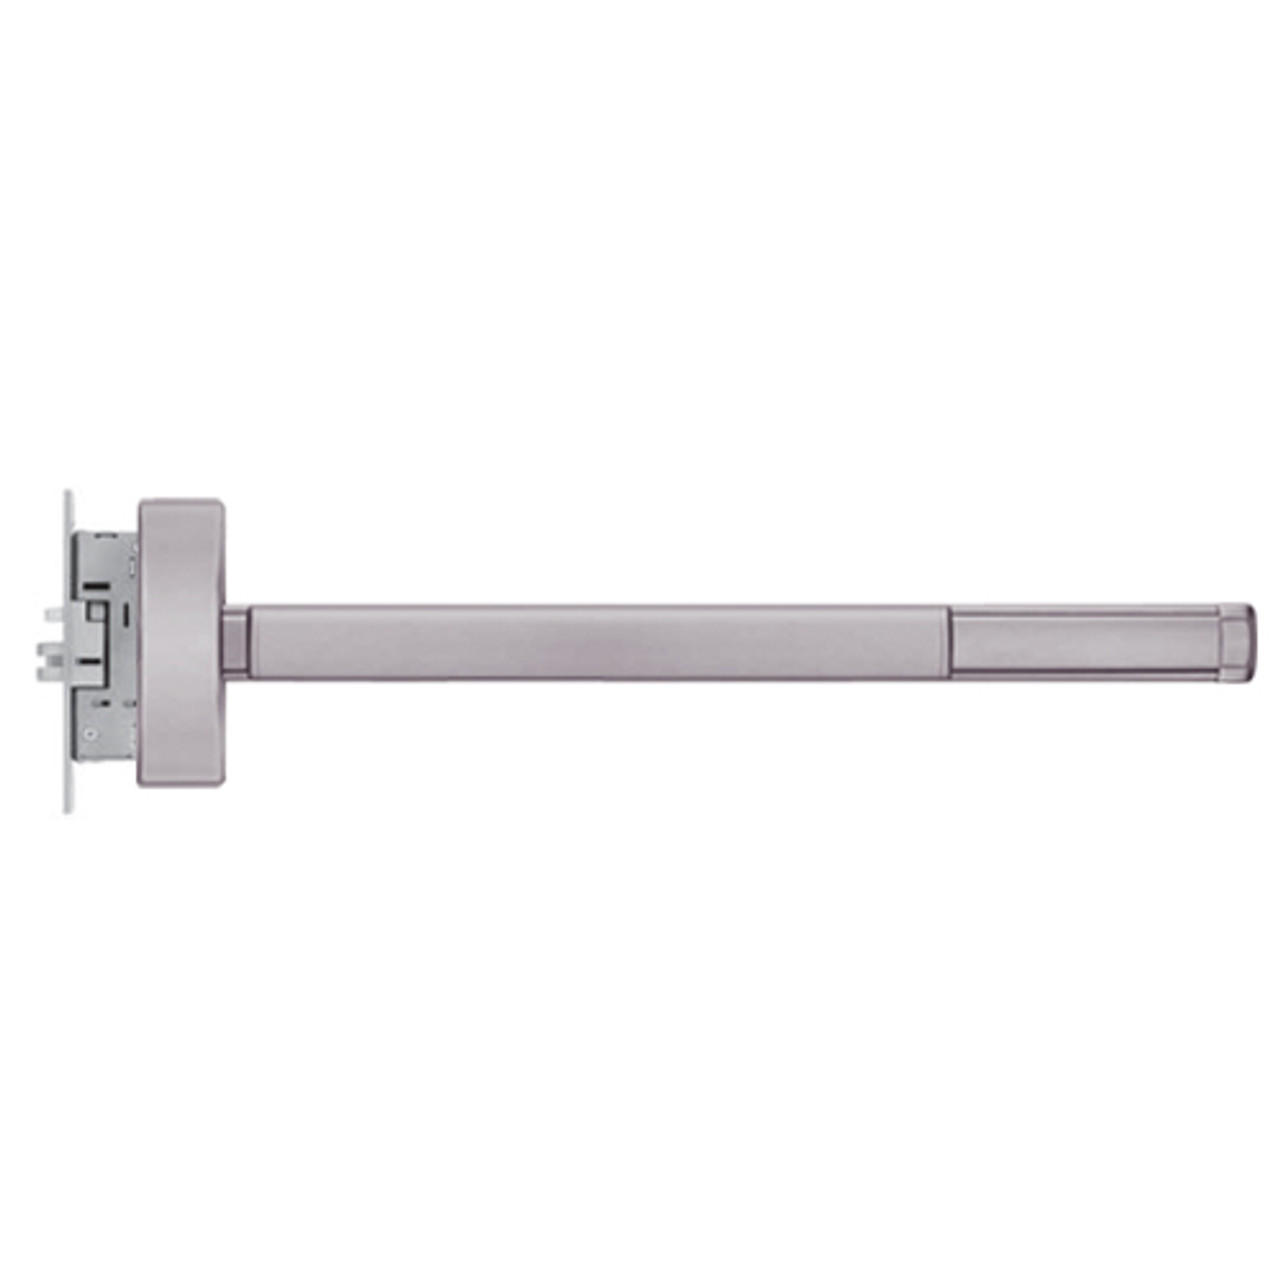 TSFL2303-RHR-630-48 PHI 2300 Series Fire Rated Apex Mortise Exit Device with Touchbar Monitoring Switch Prepped for Key Retracts Latchbolt in Satin Stainless Steel Finish